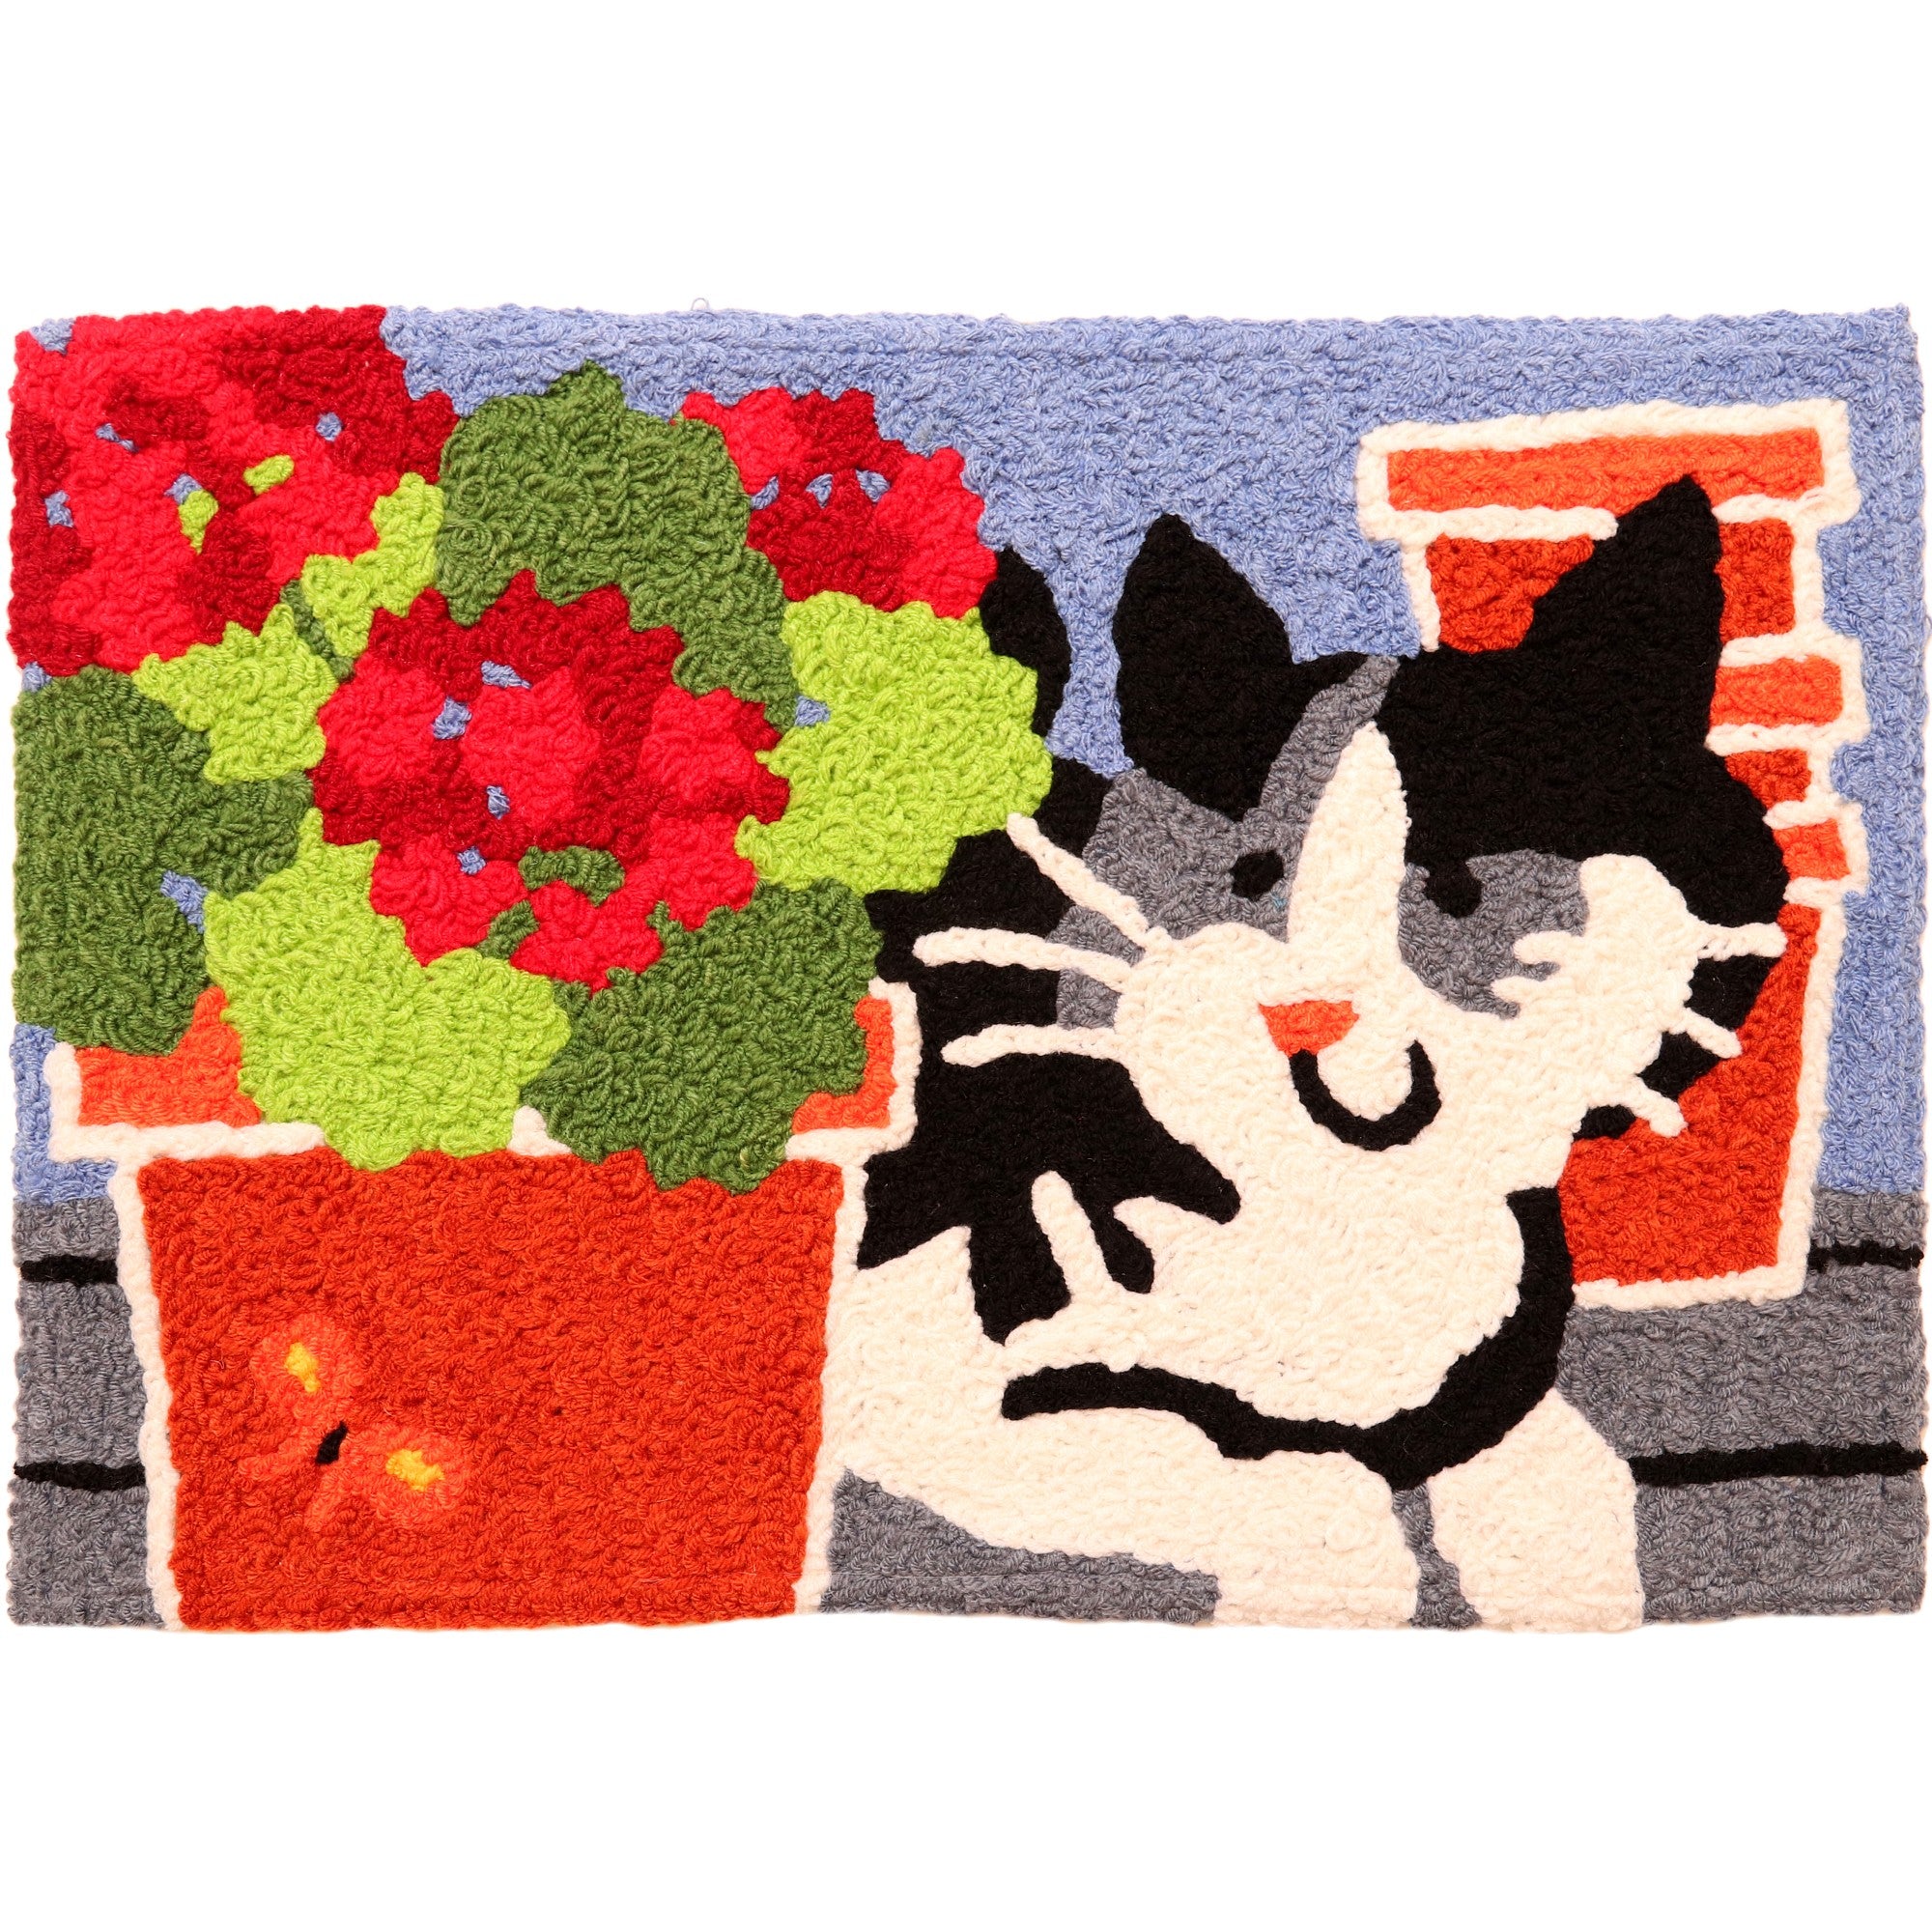 Jellybean Kitty and Potted Geraniums 20"x30" Washable Accent Rug